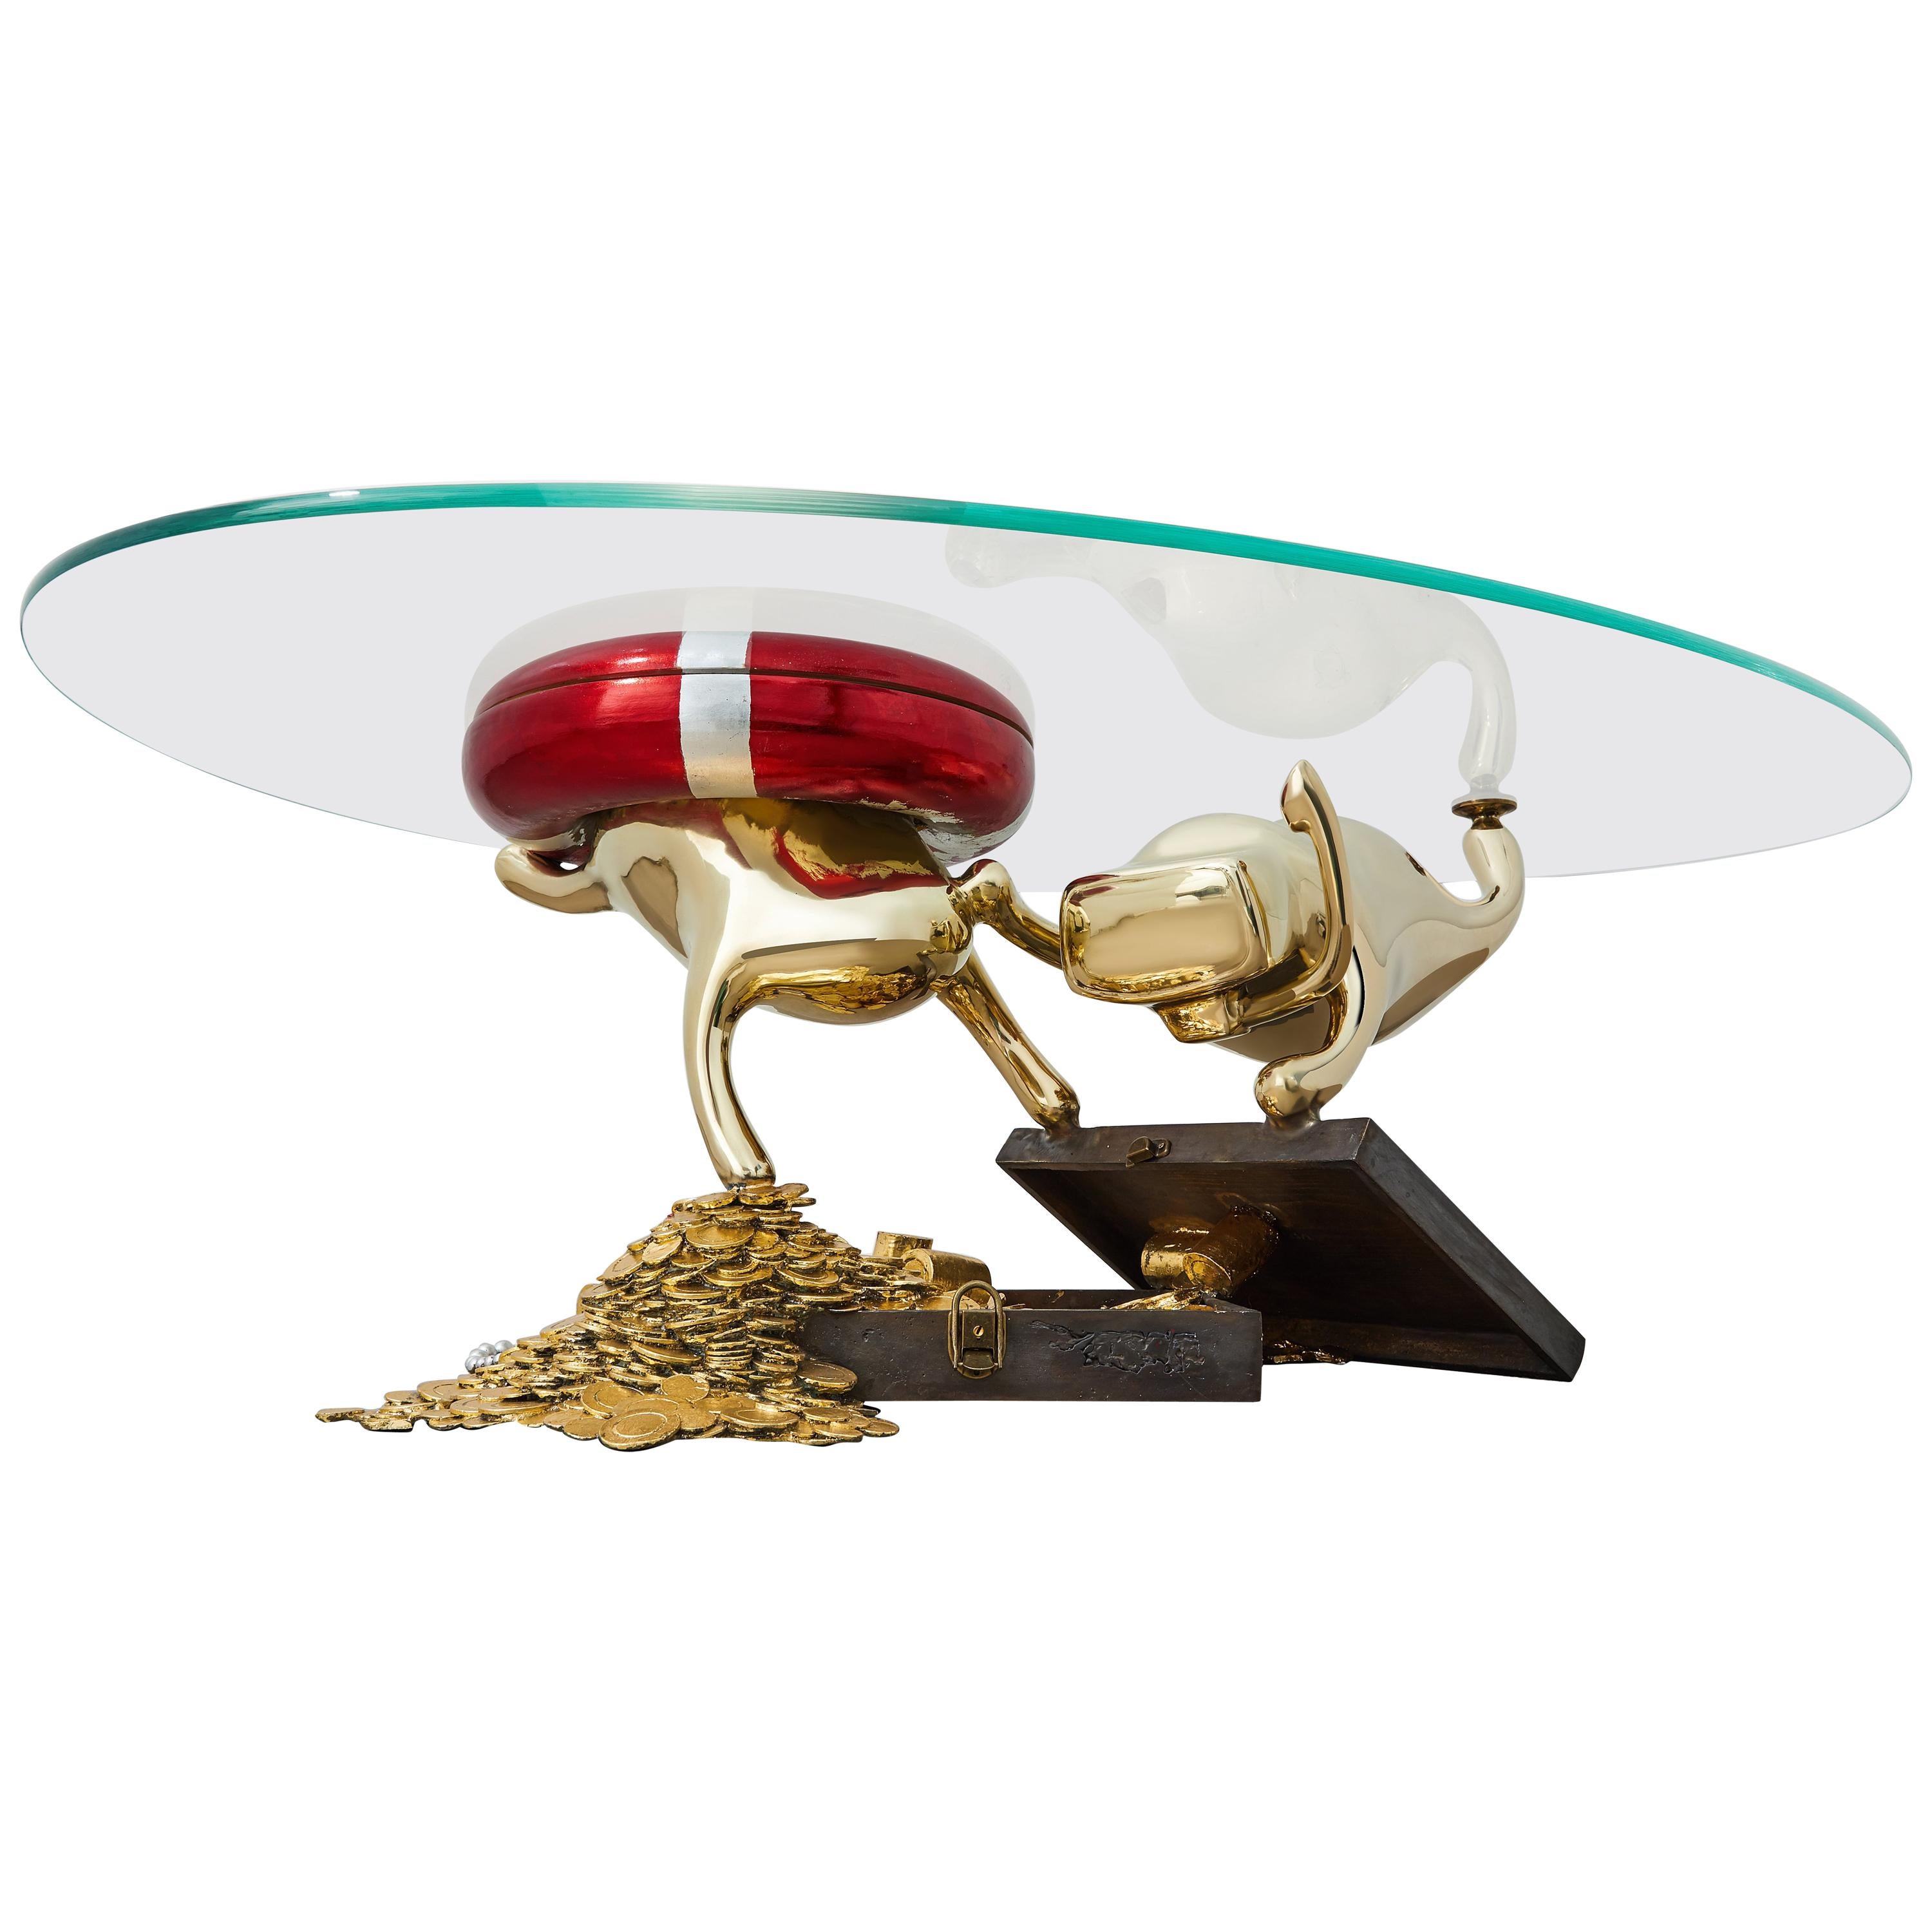 Zhipeng Tan, Brass Coffee Table, 'Treasures,' TanTan Collection